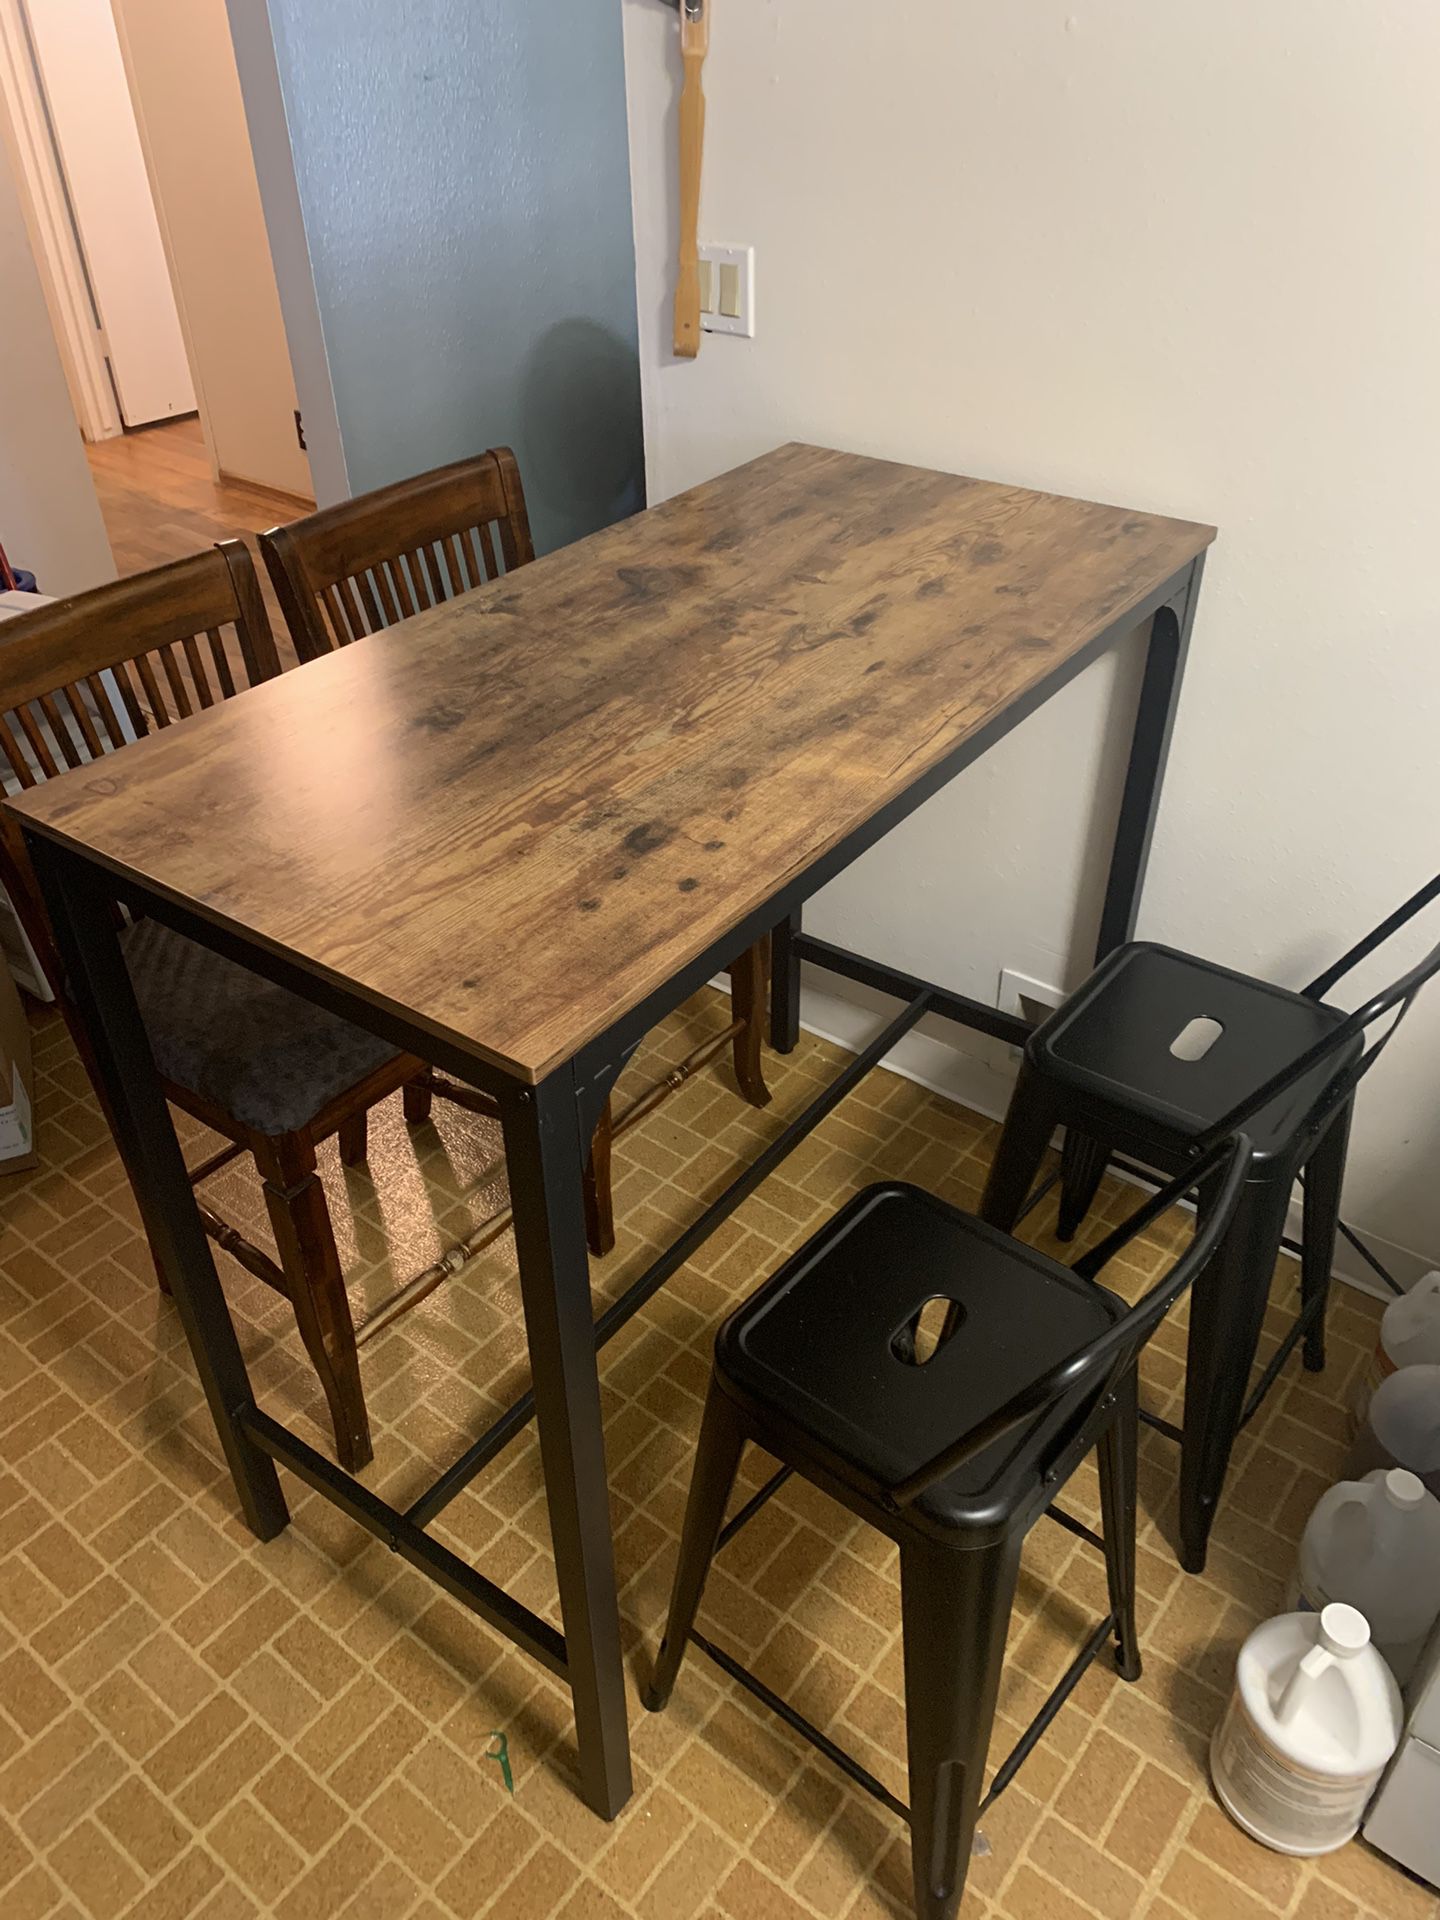 Coffe Table With Chairs